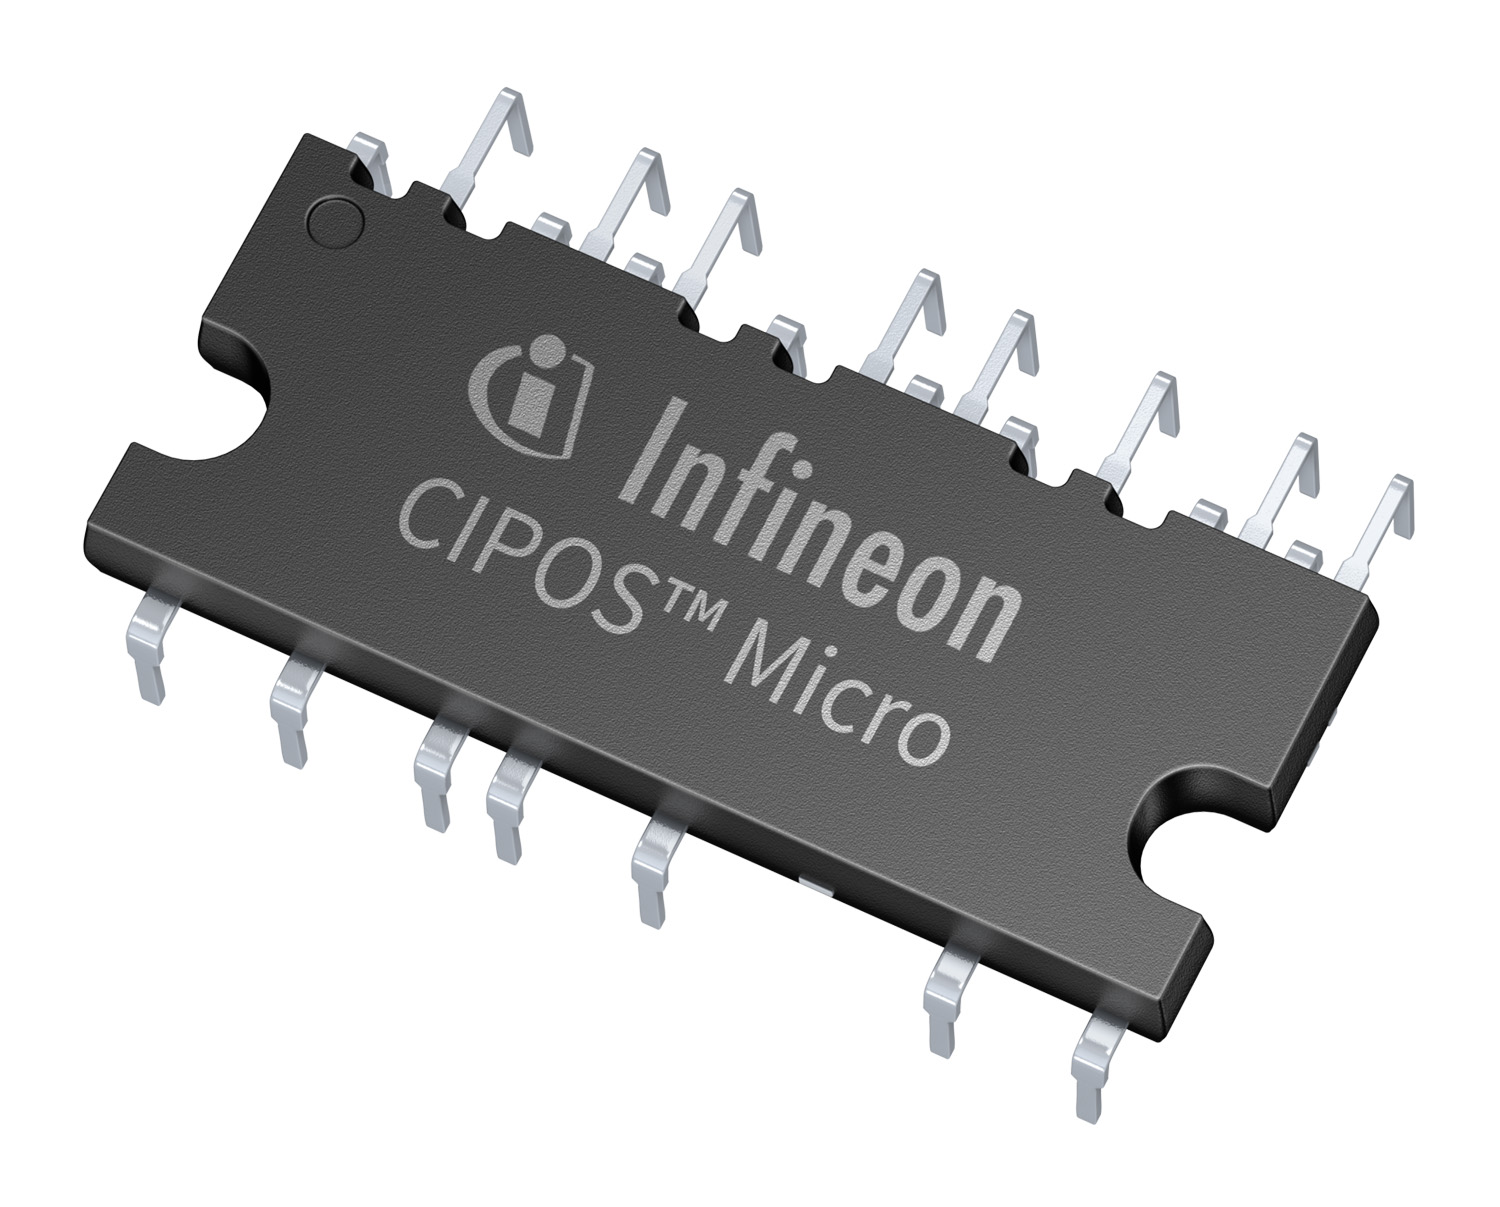 CIPOS™ Micro IPMs are qualified for harsh environments